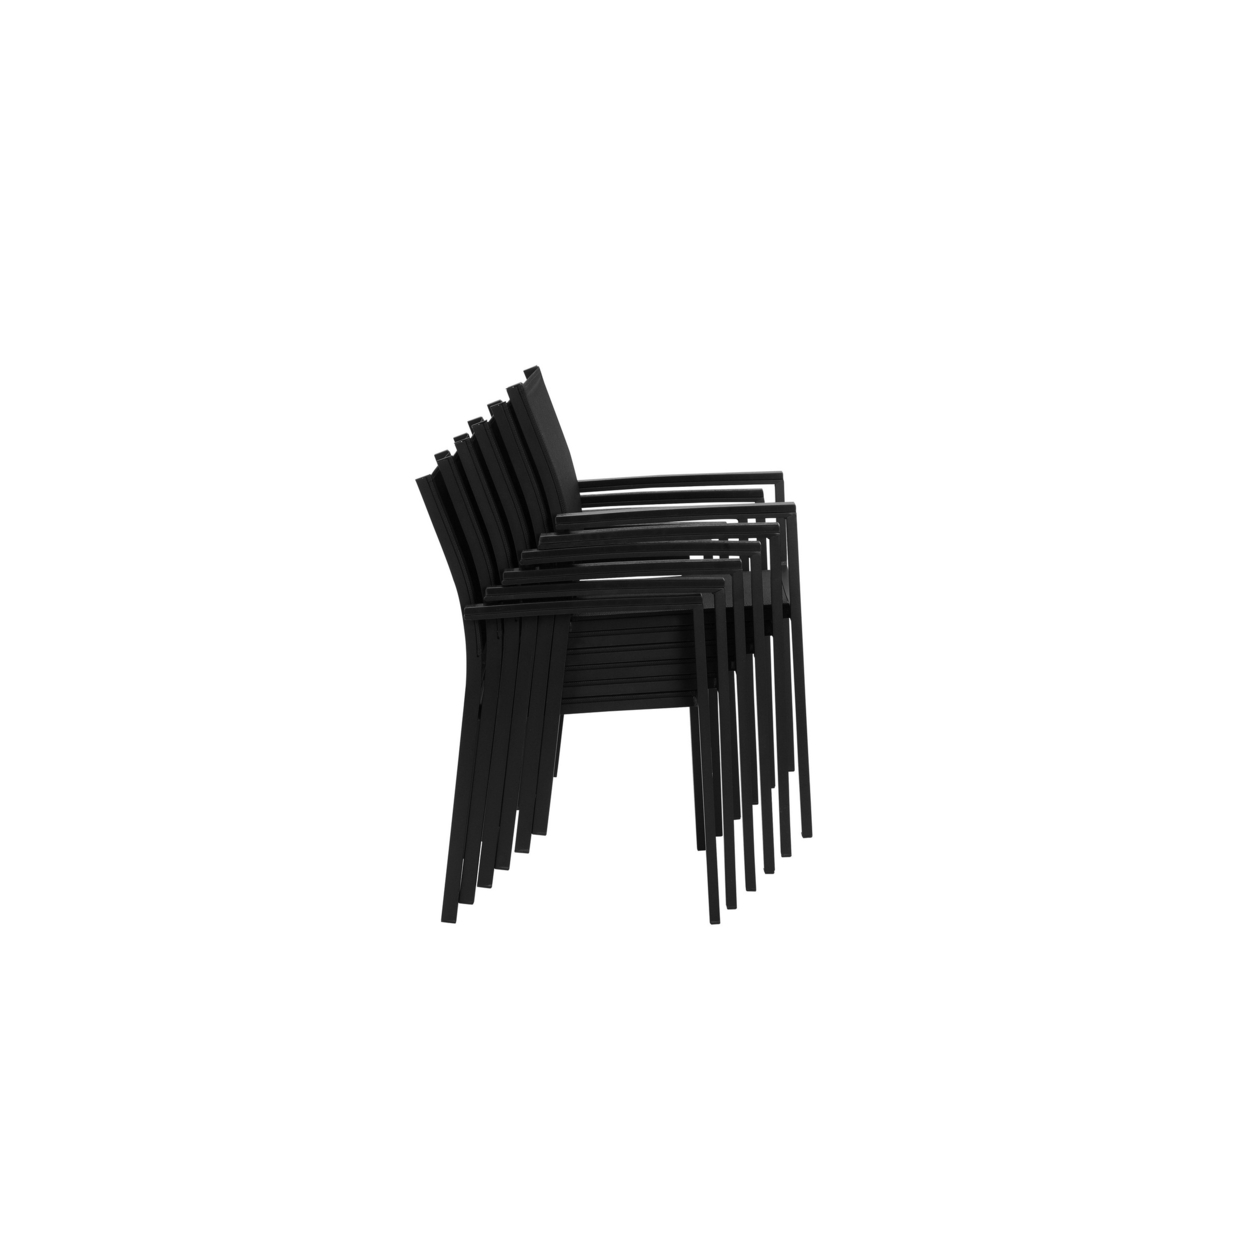 Fifi 21 Inch Set of 6 Dining Chairs, Black Aluminum Frame, Easily Stackable- Saltoro Sherpi - image 2 of 5